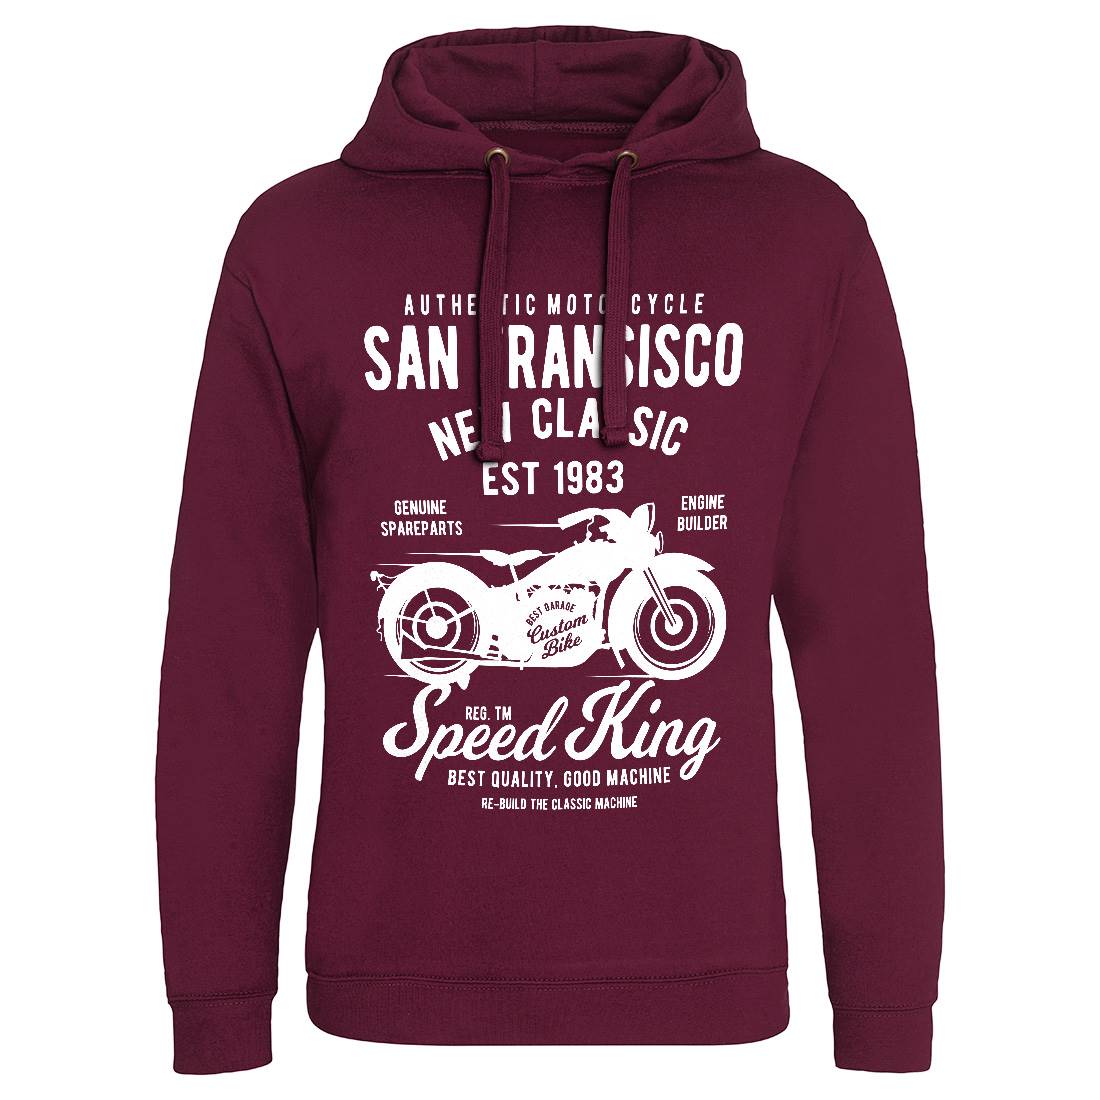 San Francisco Mens Hoodie Without Pocket Motorcycles B251